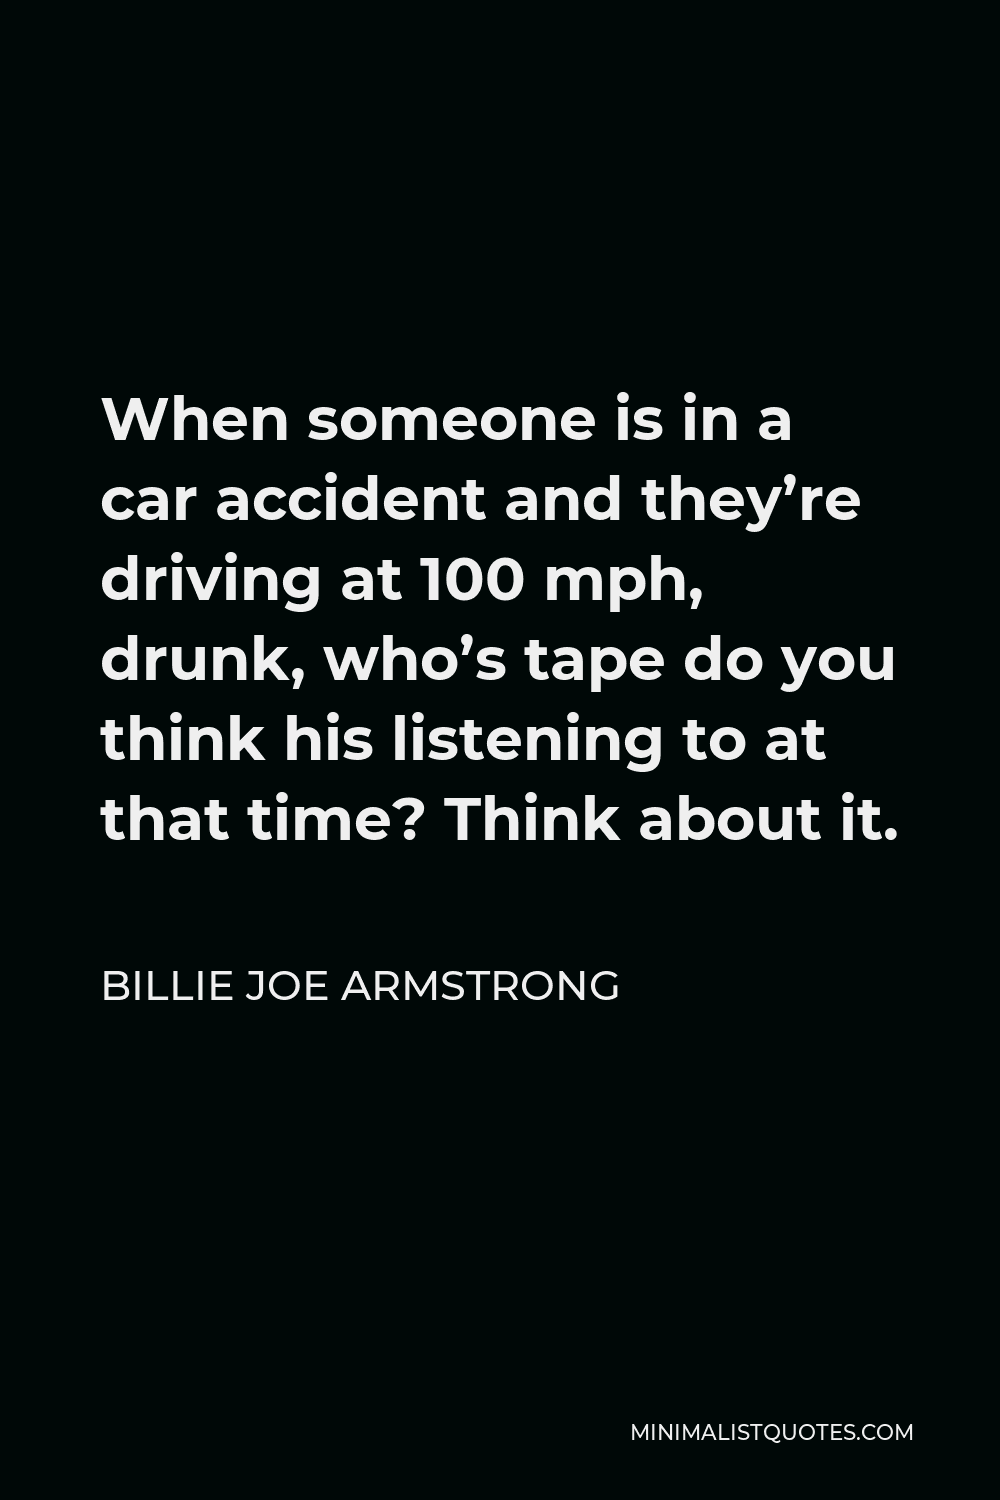 Billie Joe Armstrong Quote - When someone is in a car accident and they’re driving at 100 mph, drunk, who’s tape do you think his listening to at that time? Think about it.